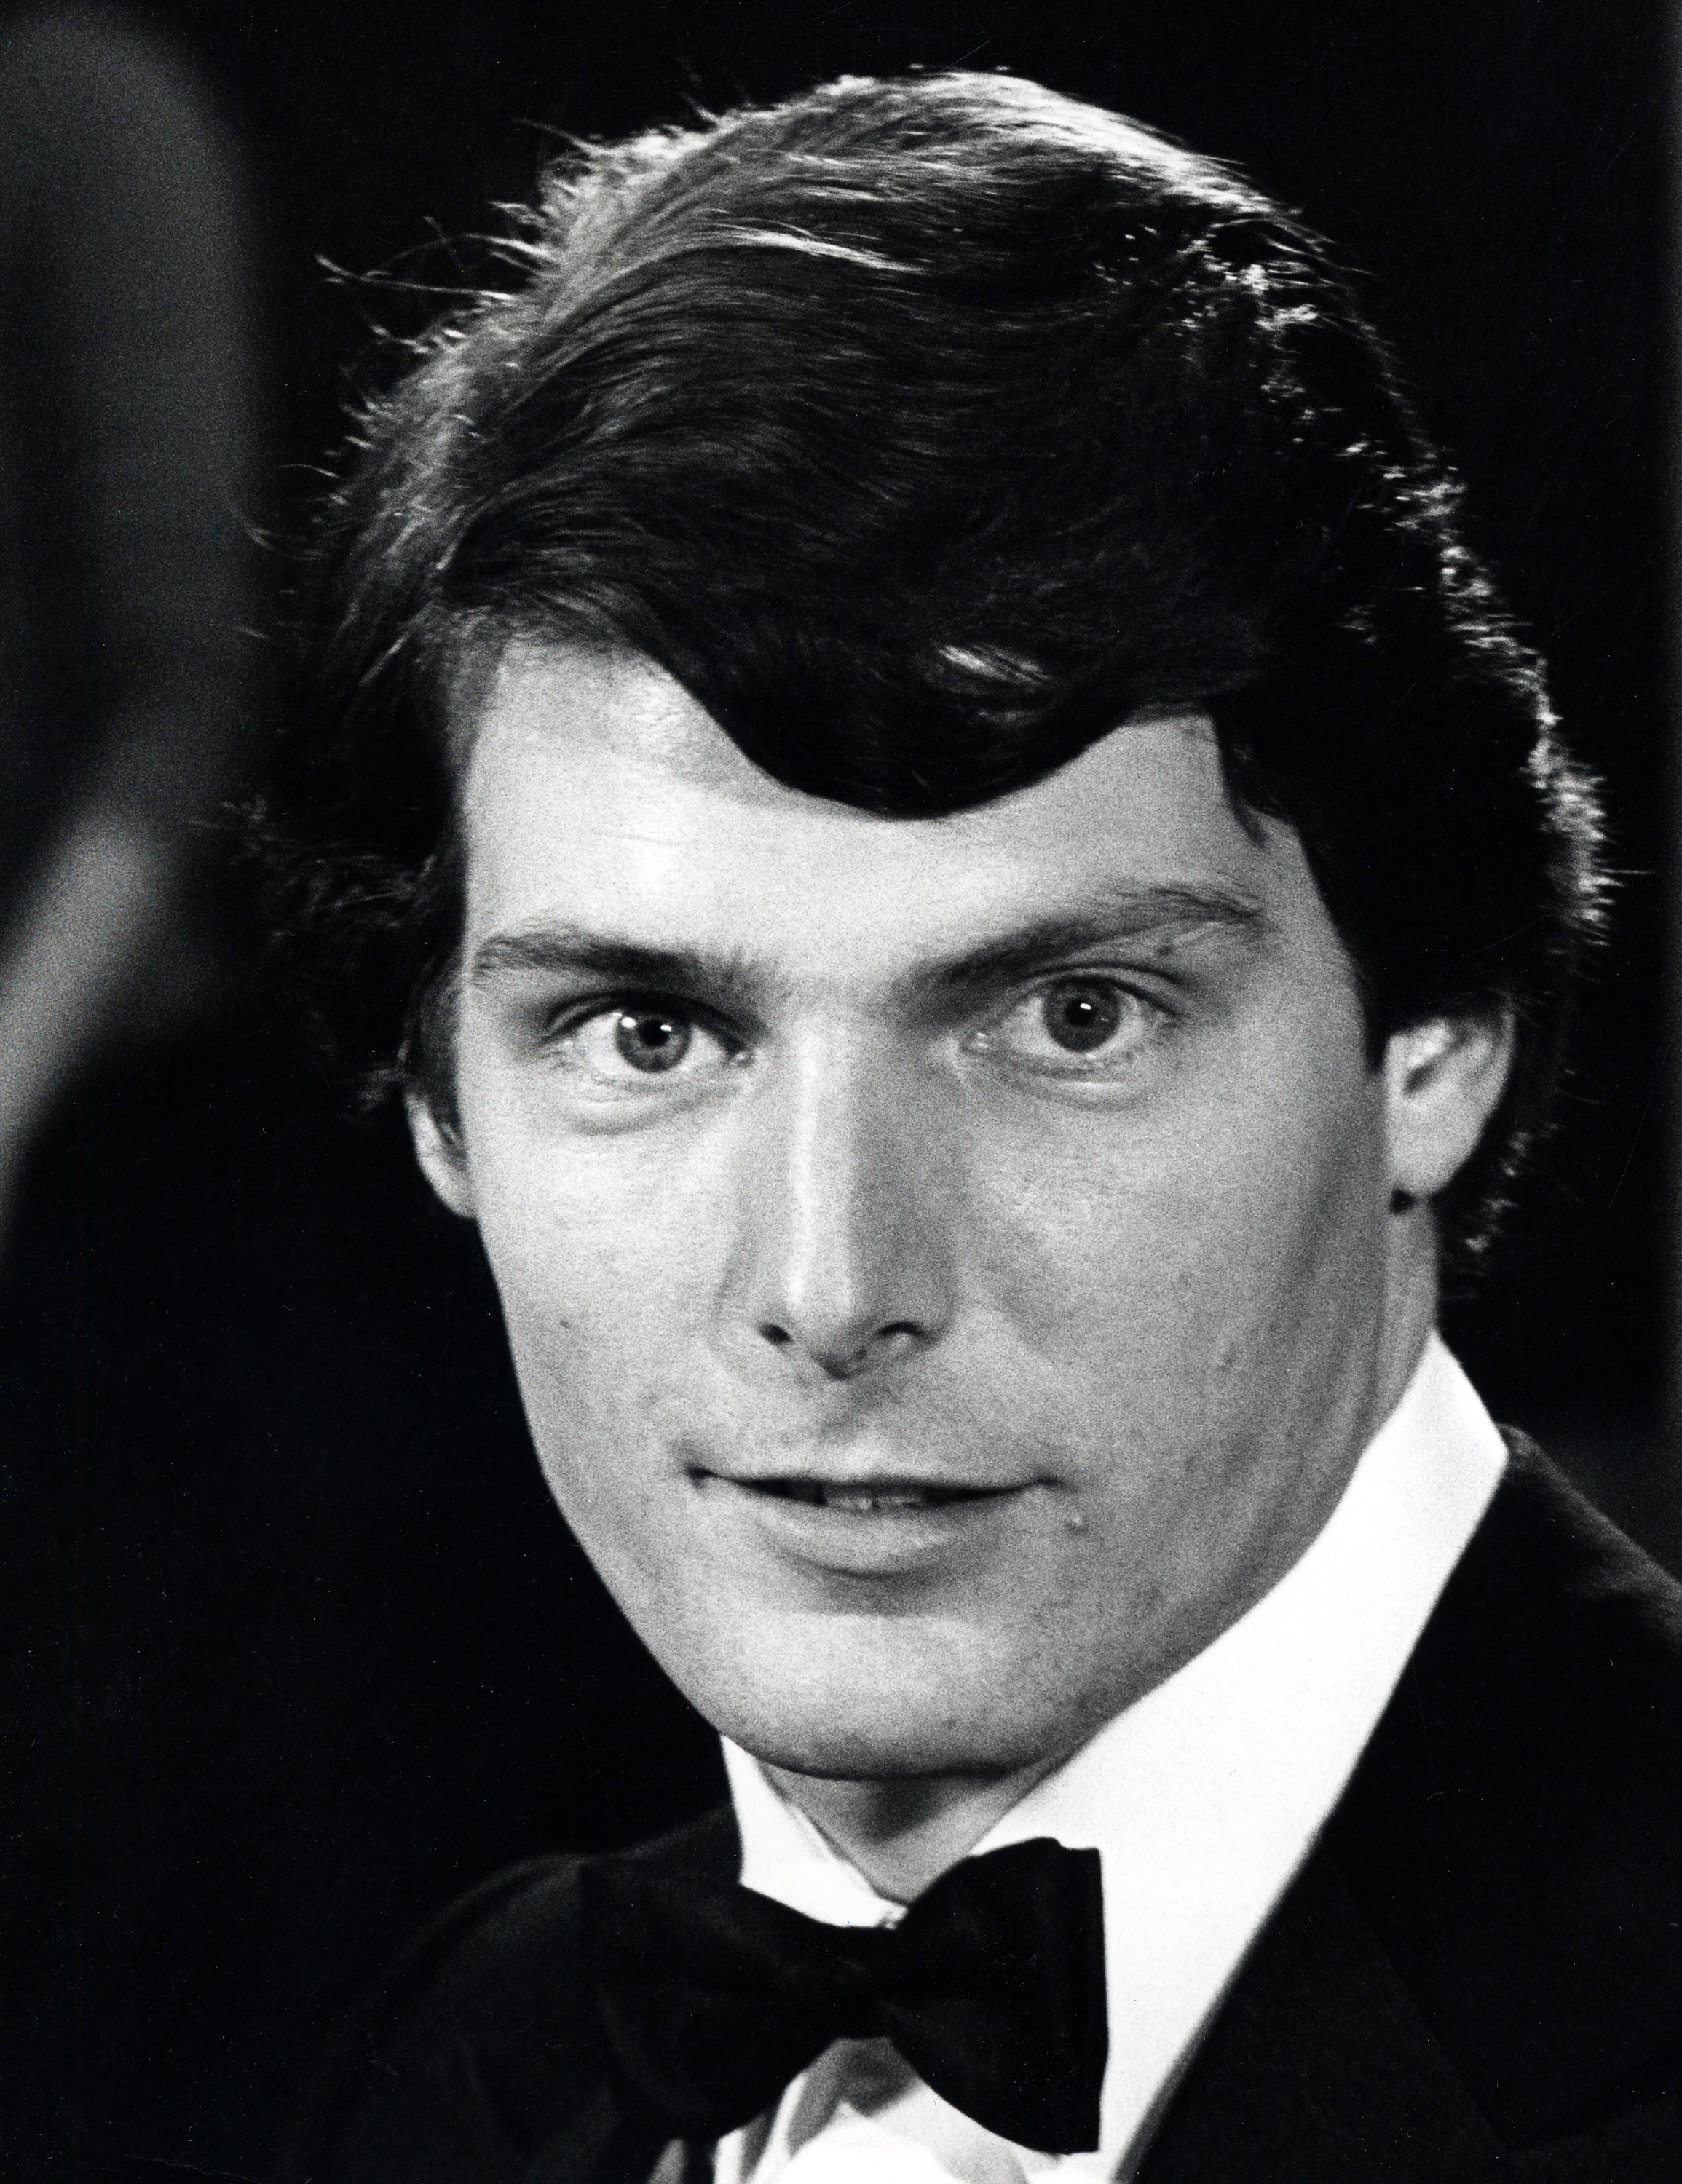 Christopher Reeve during Presidential Premiere of "Superman" in Washington, D.C. on December 10, 1978 | Source: Getty Images